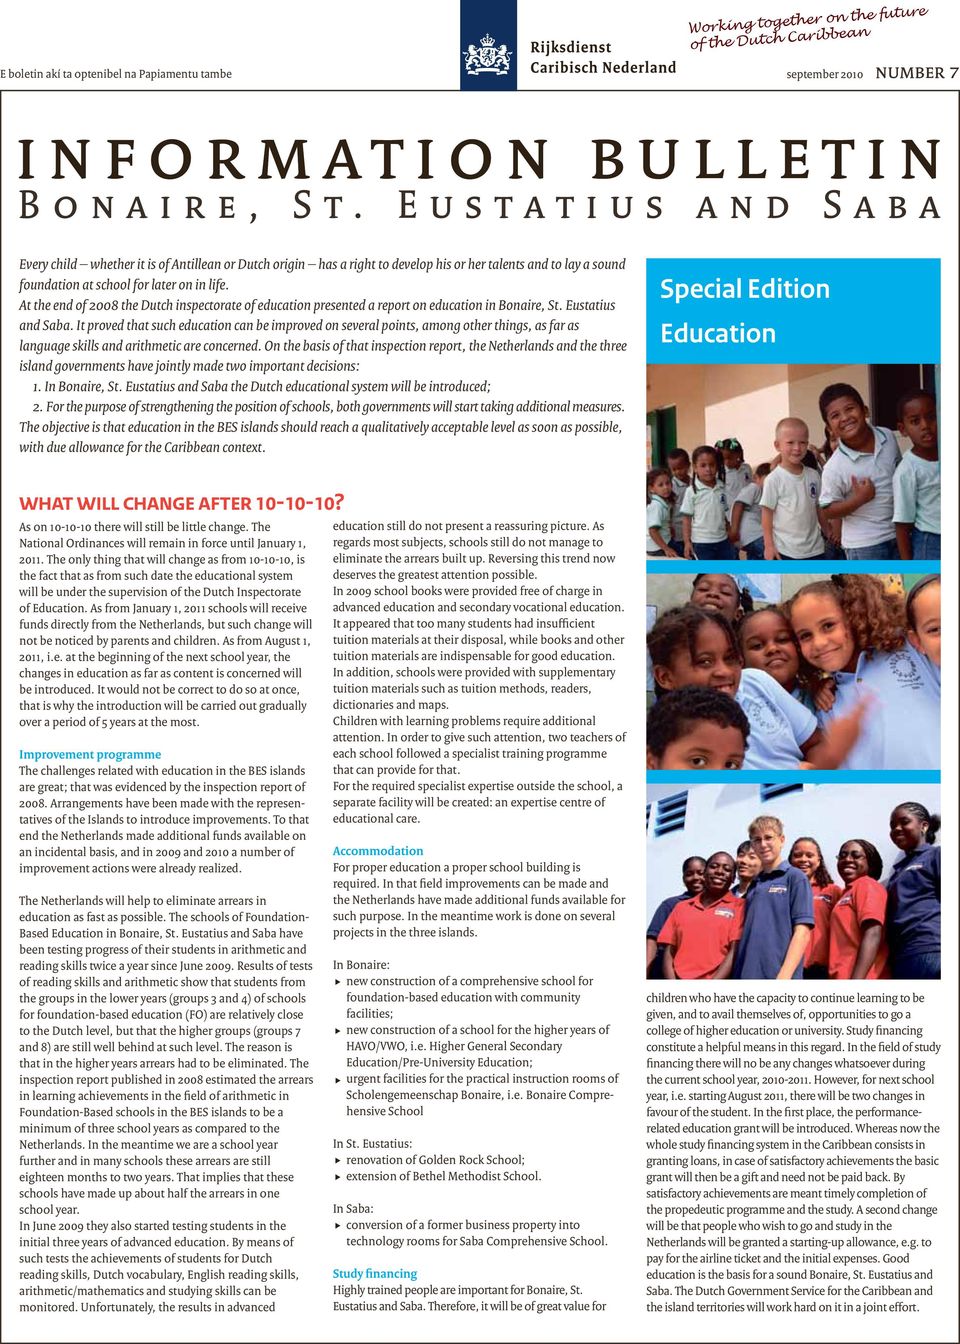 At the end of 2008 the Dutch inspectorate of education presented a report on education in Bonaire, St. Eustatius and Saba.